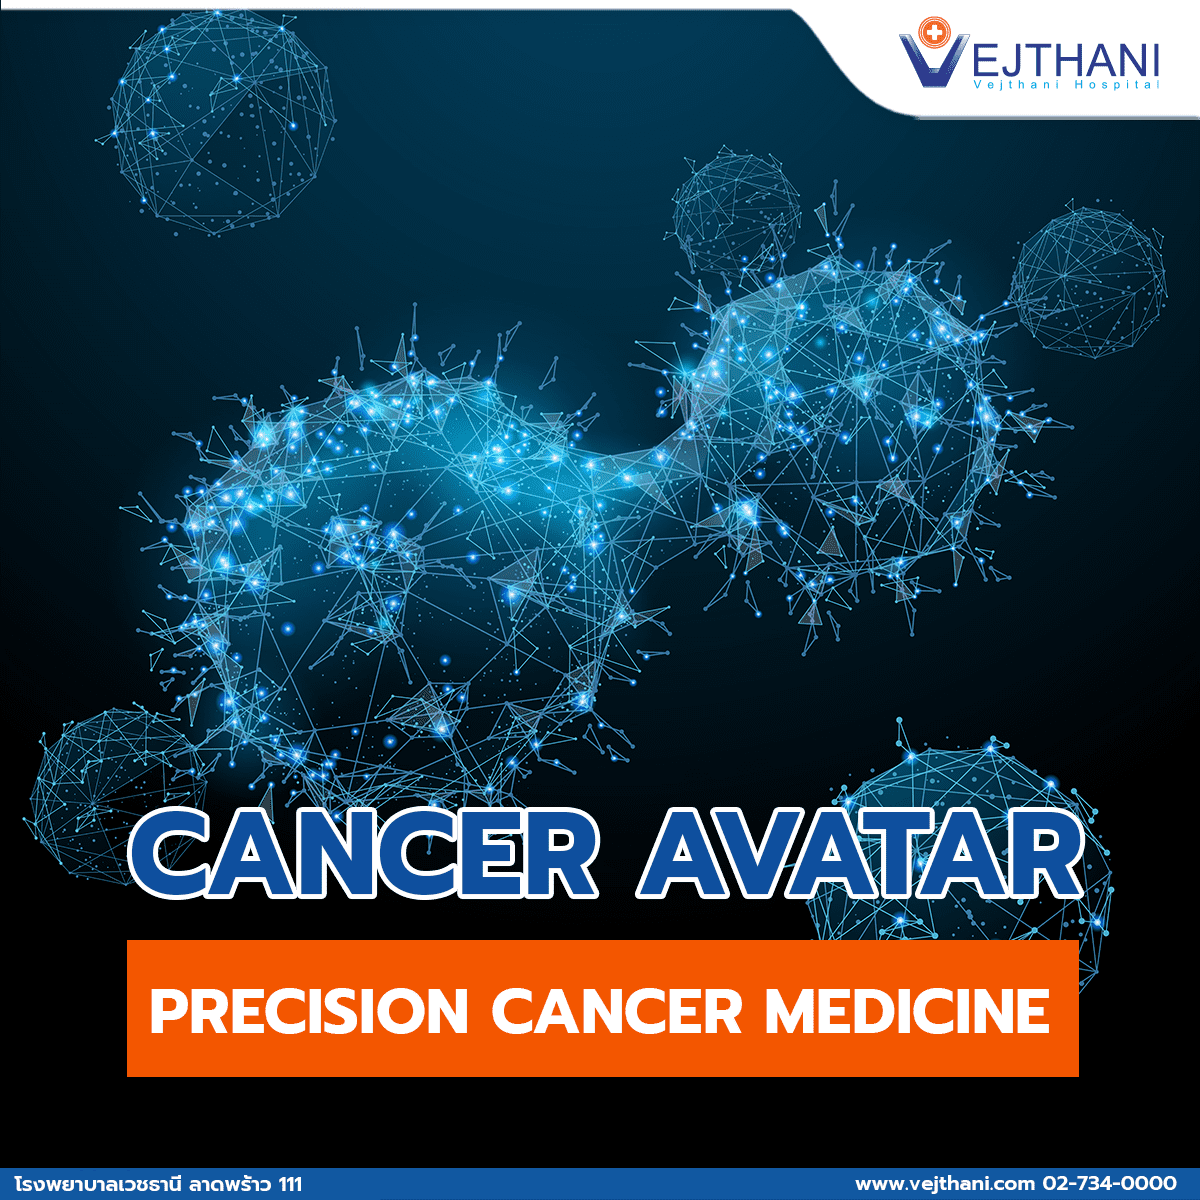 Cancer Avatars for Personalized Medicine